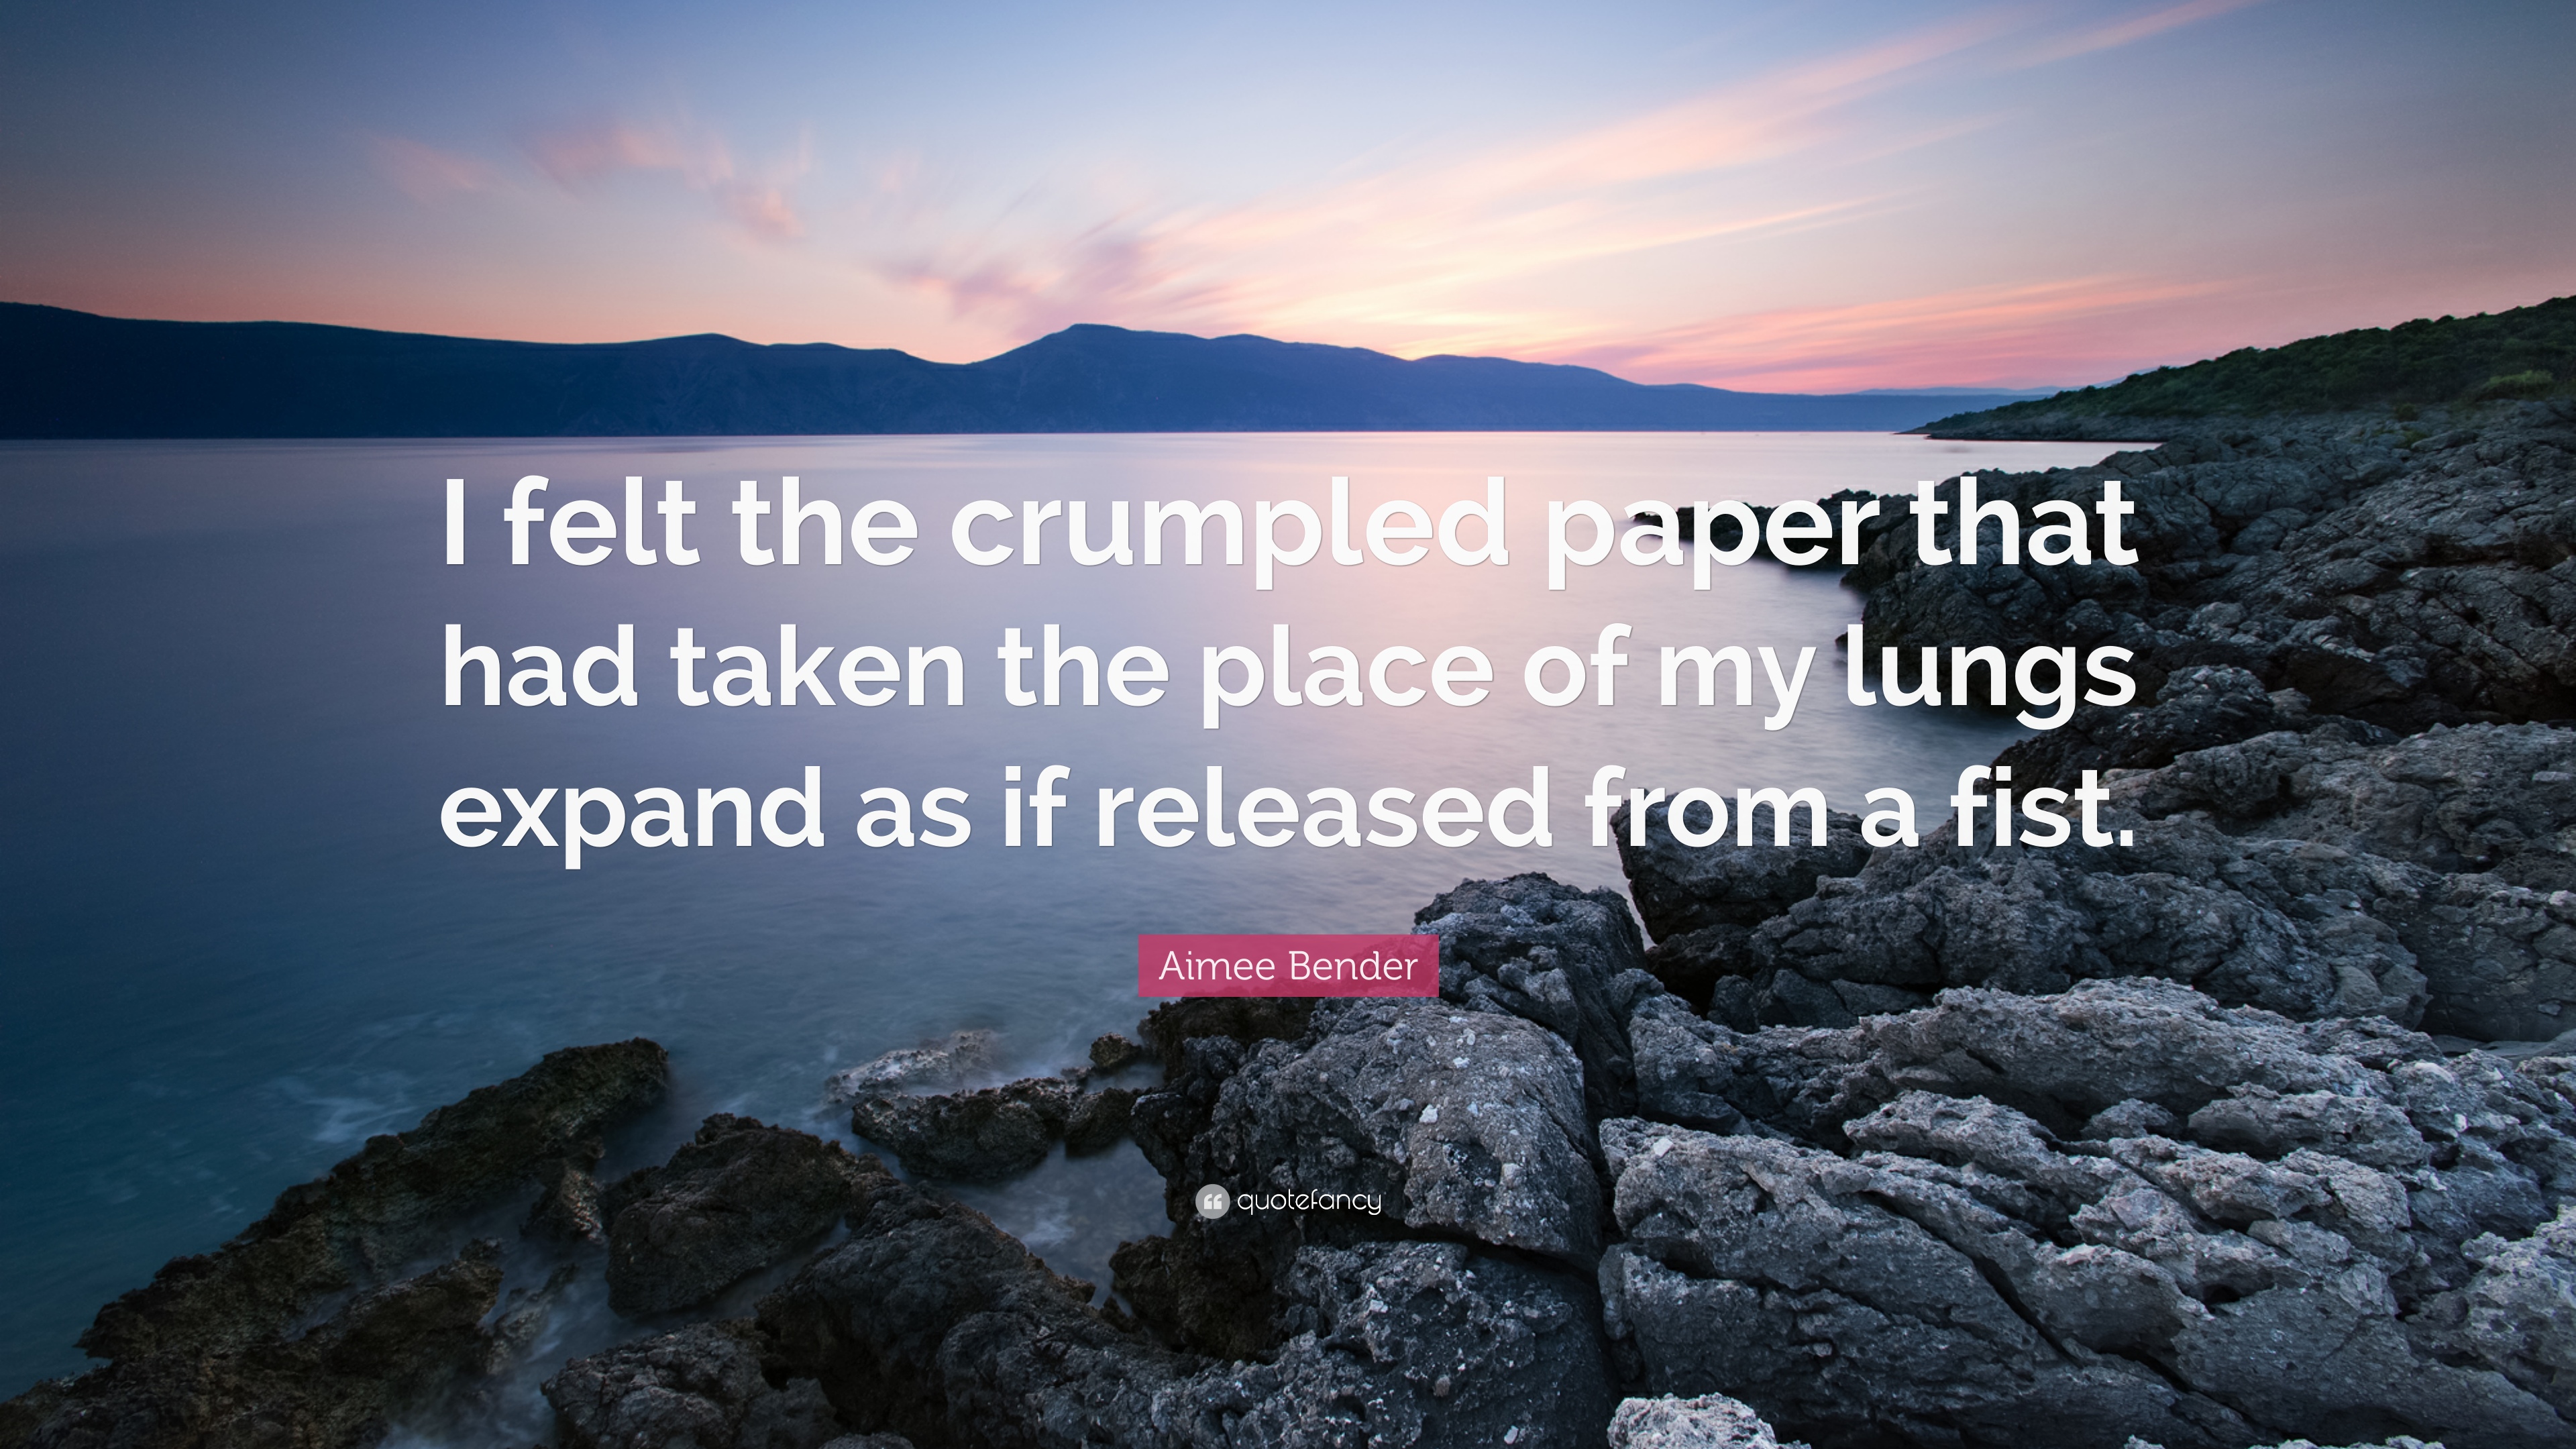 Aimee Bender Quote: “I felt the crumpled paper that had taken the ...